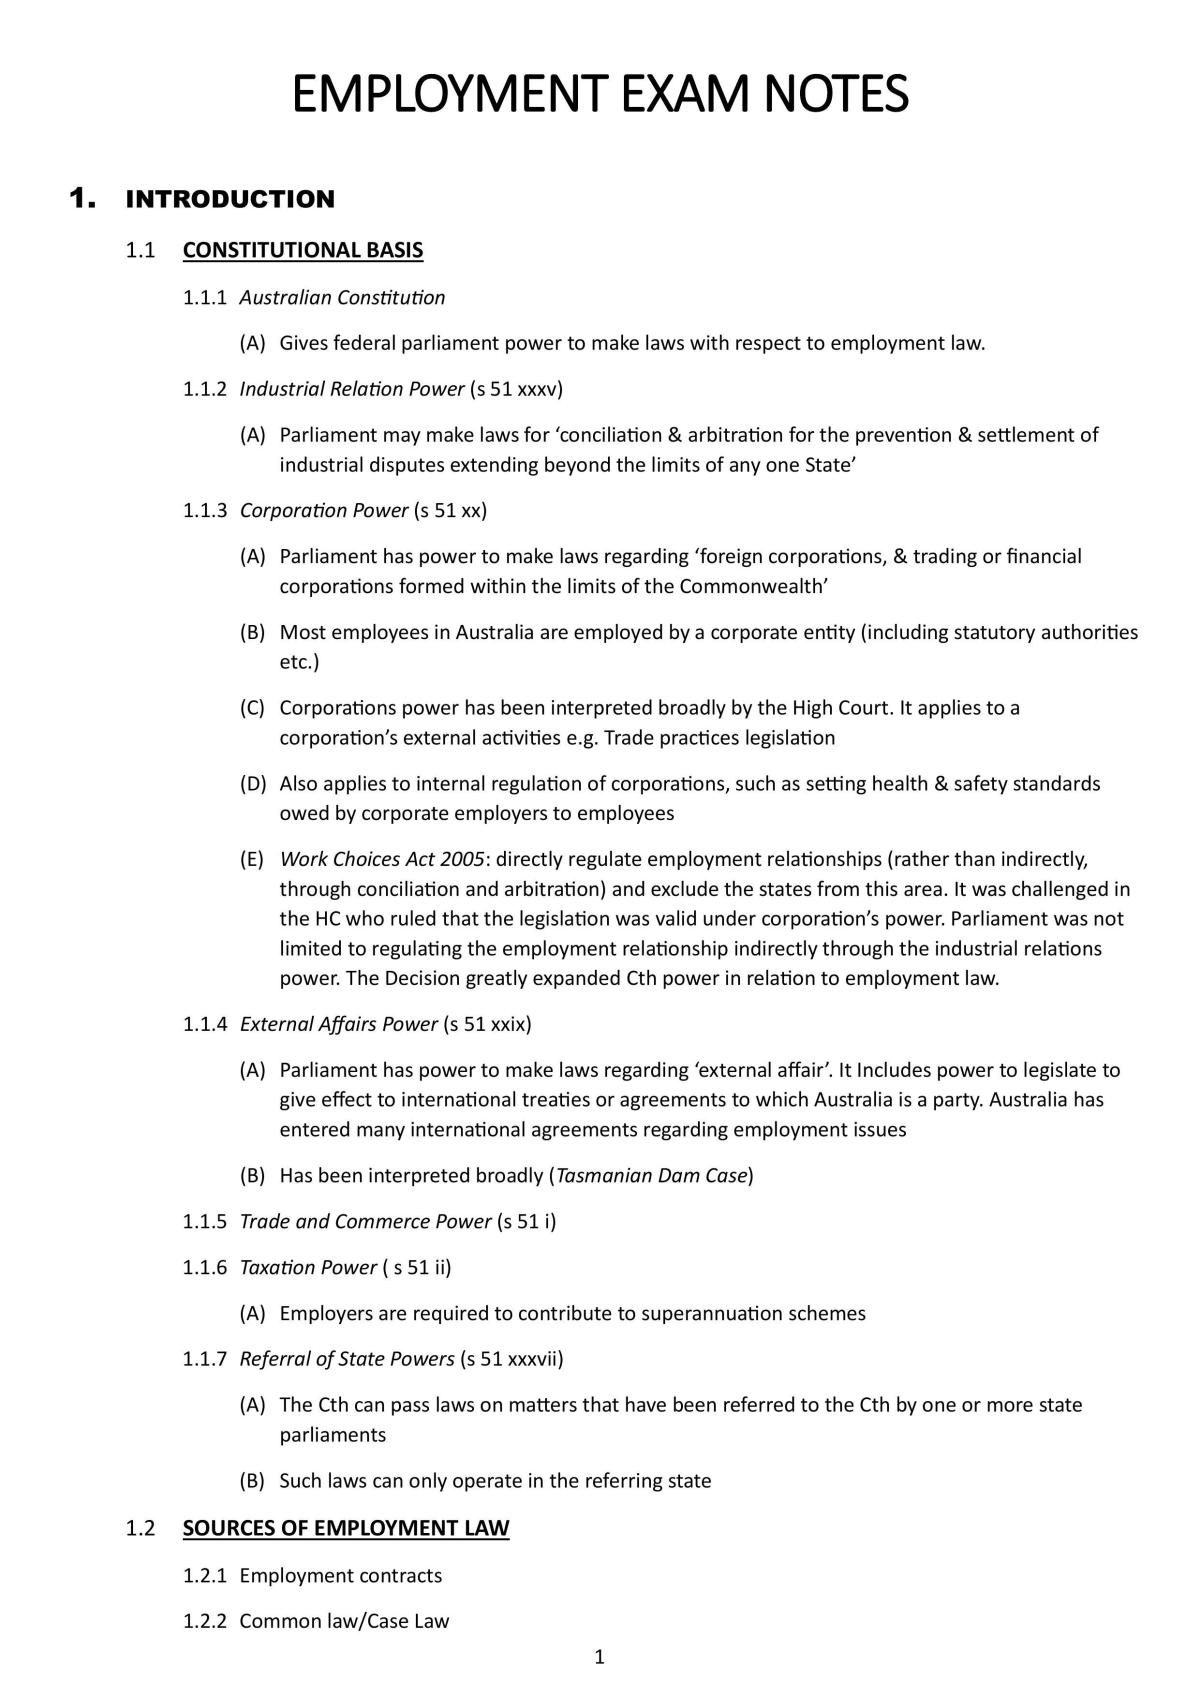 Employment Exam Notes - Extensive and Comprehensive - Page 1